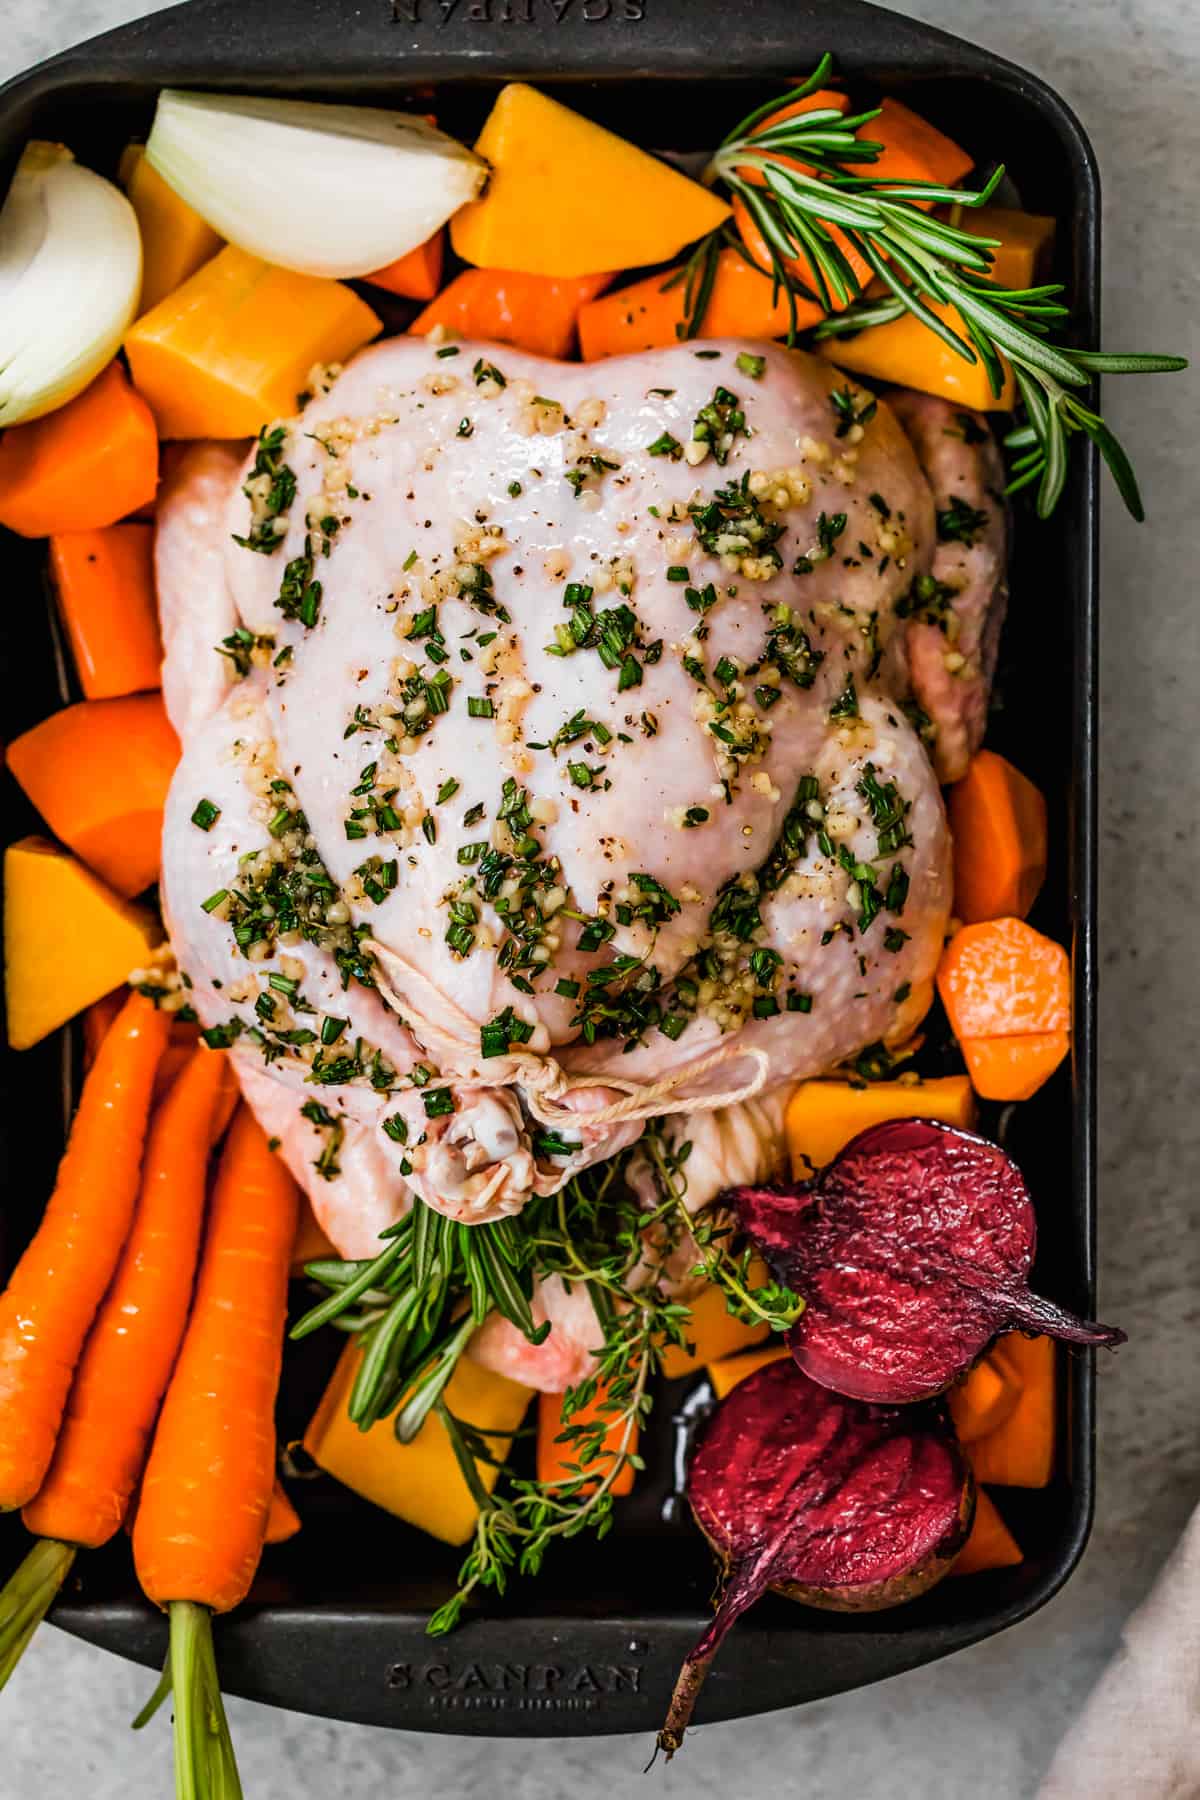 Whole raw broiler chicken in a baking pan with root vegetables.